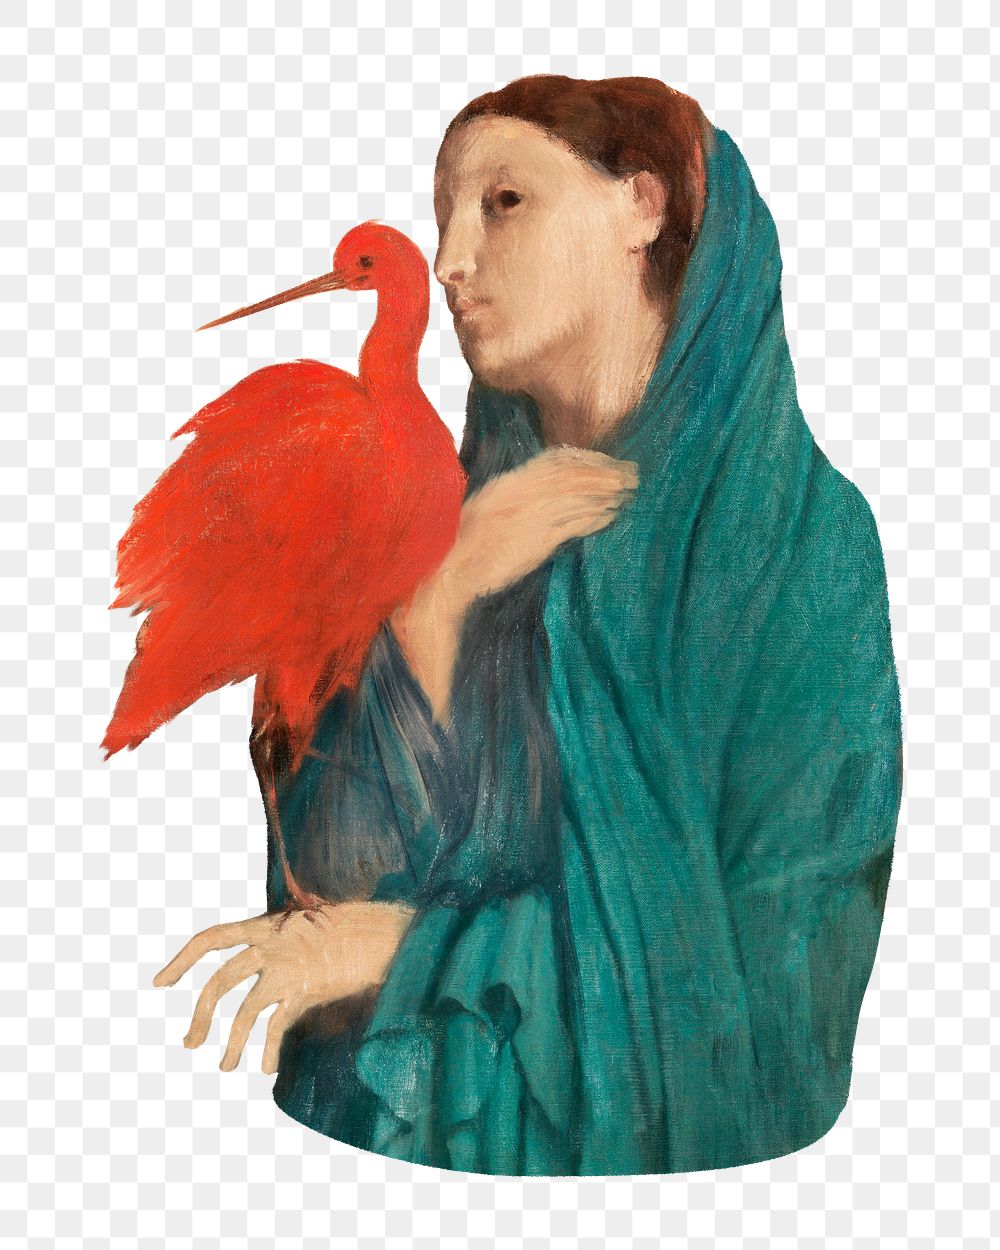 Woman with Ibis png vintage illustration, transparent background. Famous artwork by Edgar Degas, remixed by rawpixel.